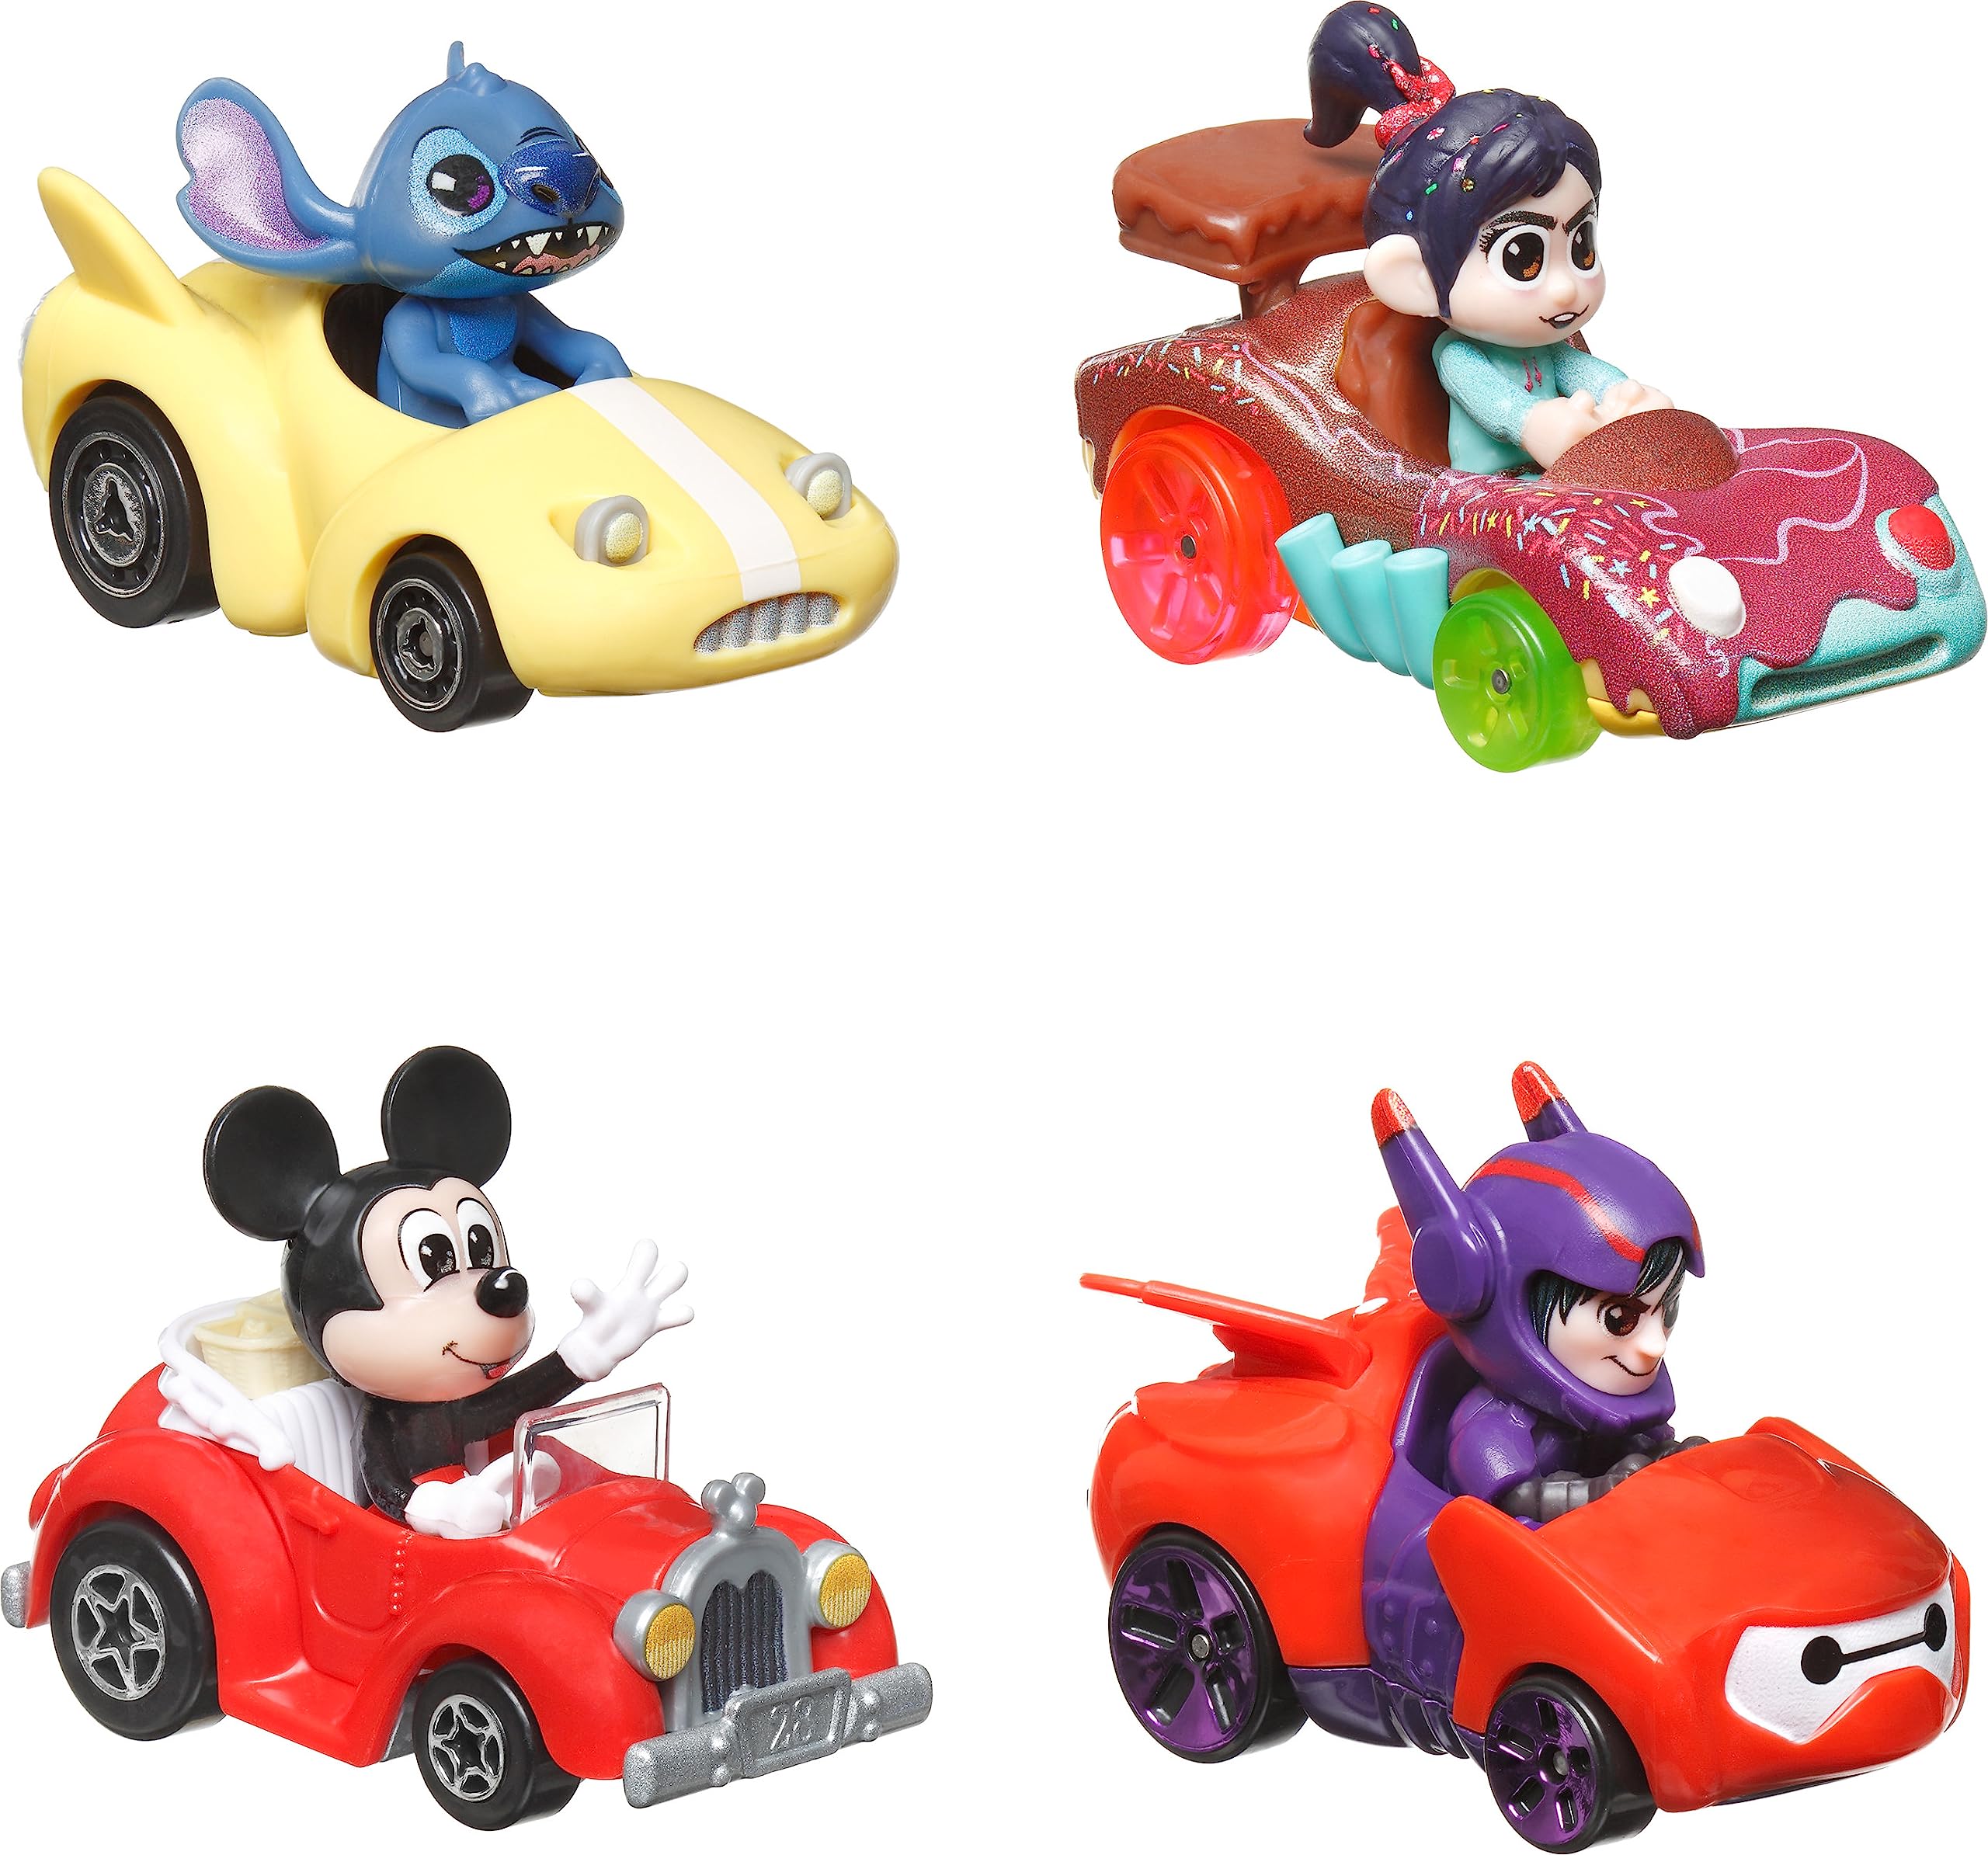 Hot Wheels RacerVerse, Set of 4 Die-Cast Disney Toy Cars Optimized for Hot Wheels Track with Popular Disney Characters as Drivers